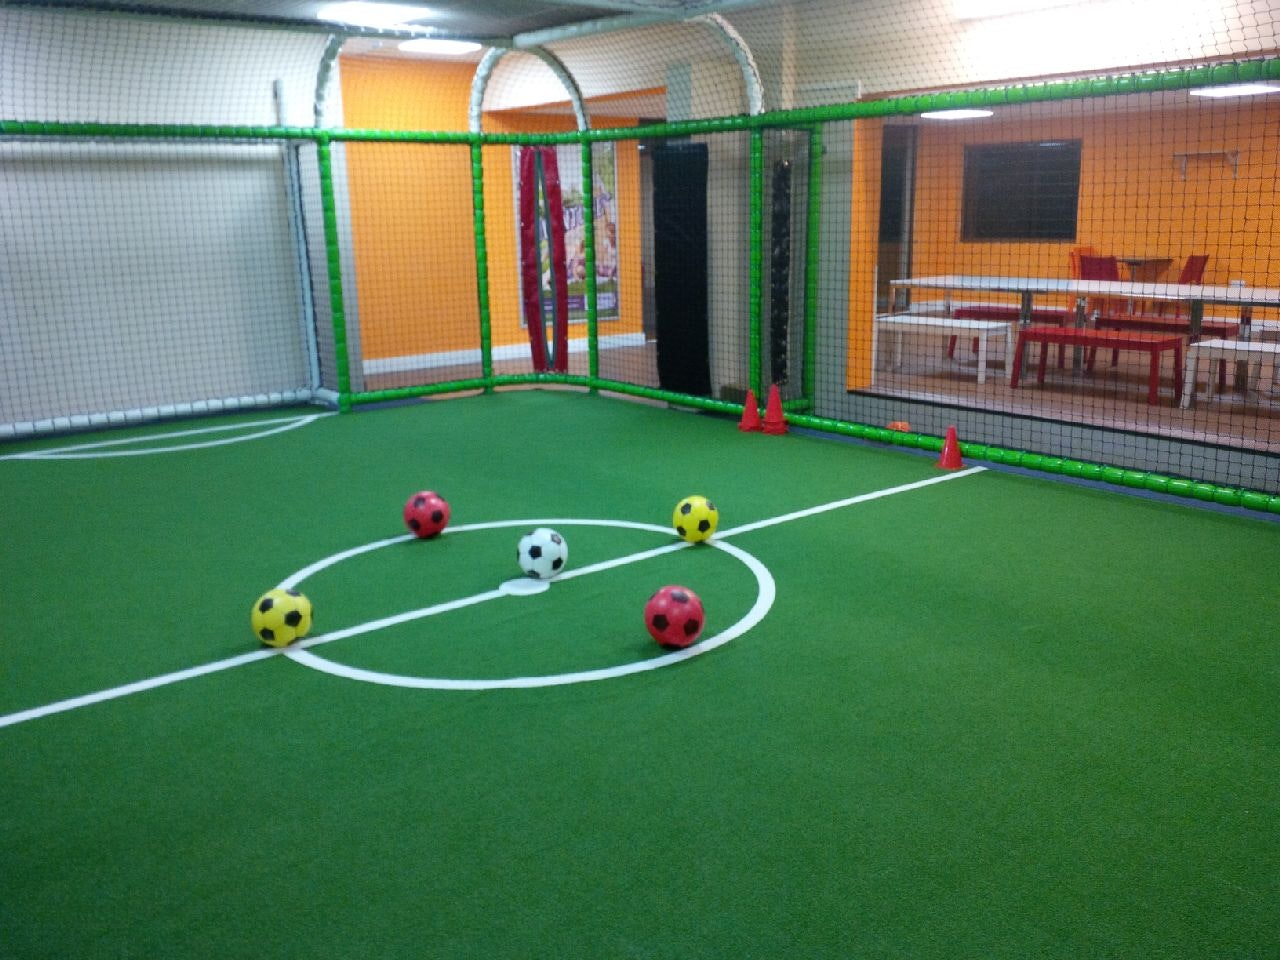 Toddler Party Venues in London - Play Wembley